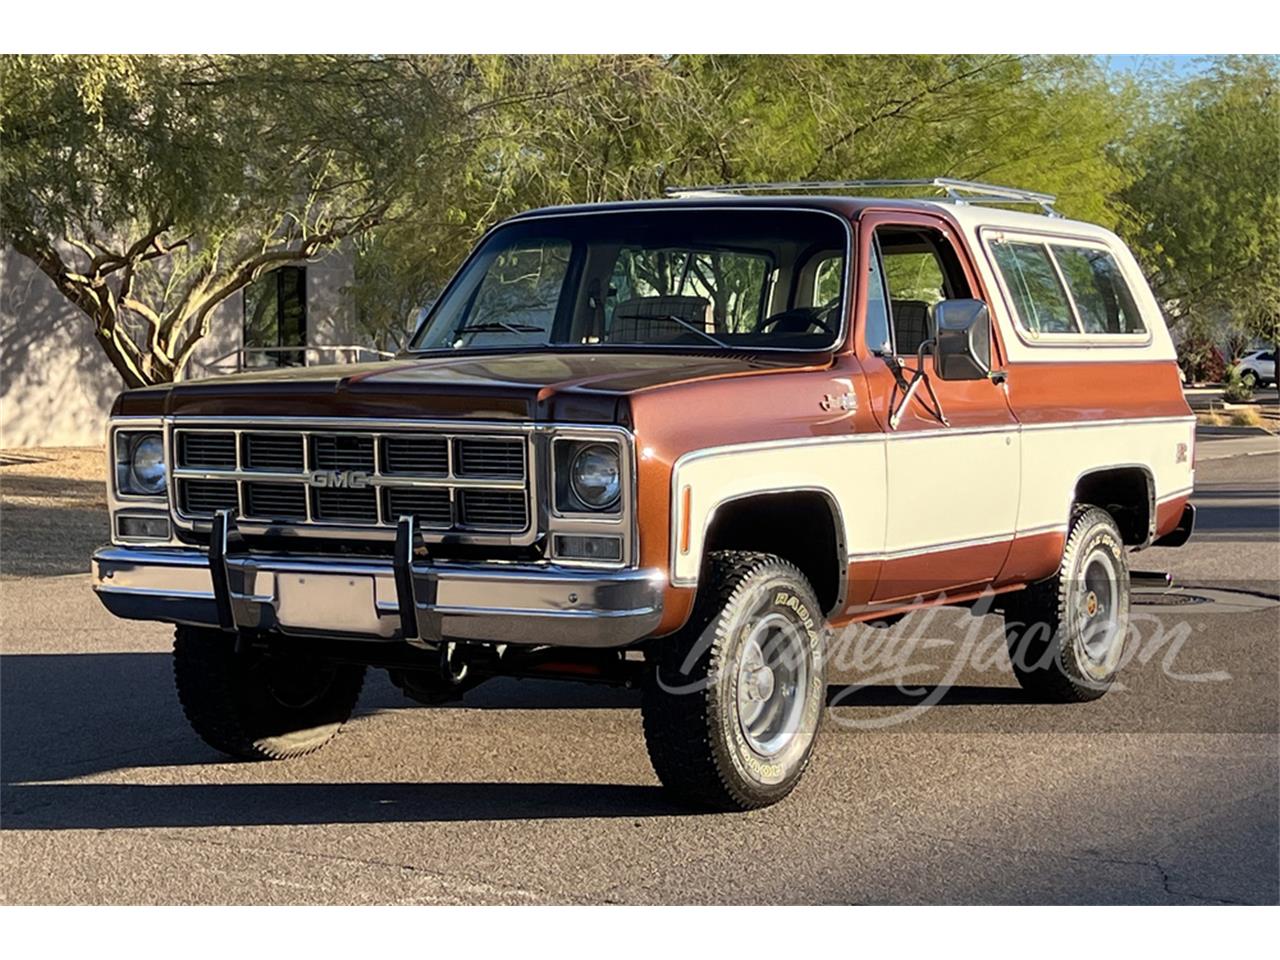 For Sale at Auction: 1979 GMC Jimmy in Scottsdale, Arizona for sale in Scottsdale, AZ